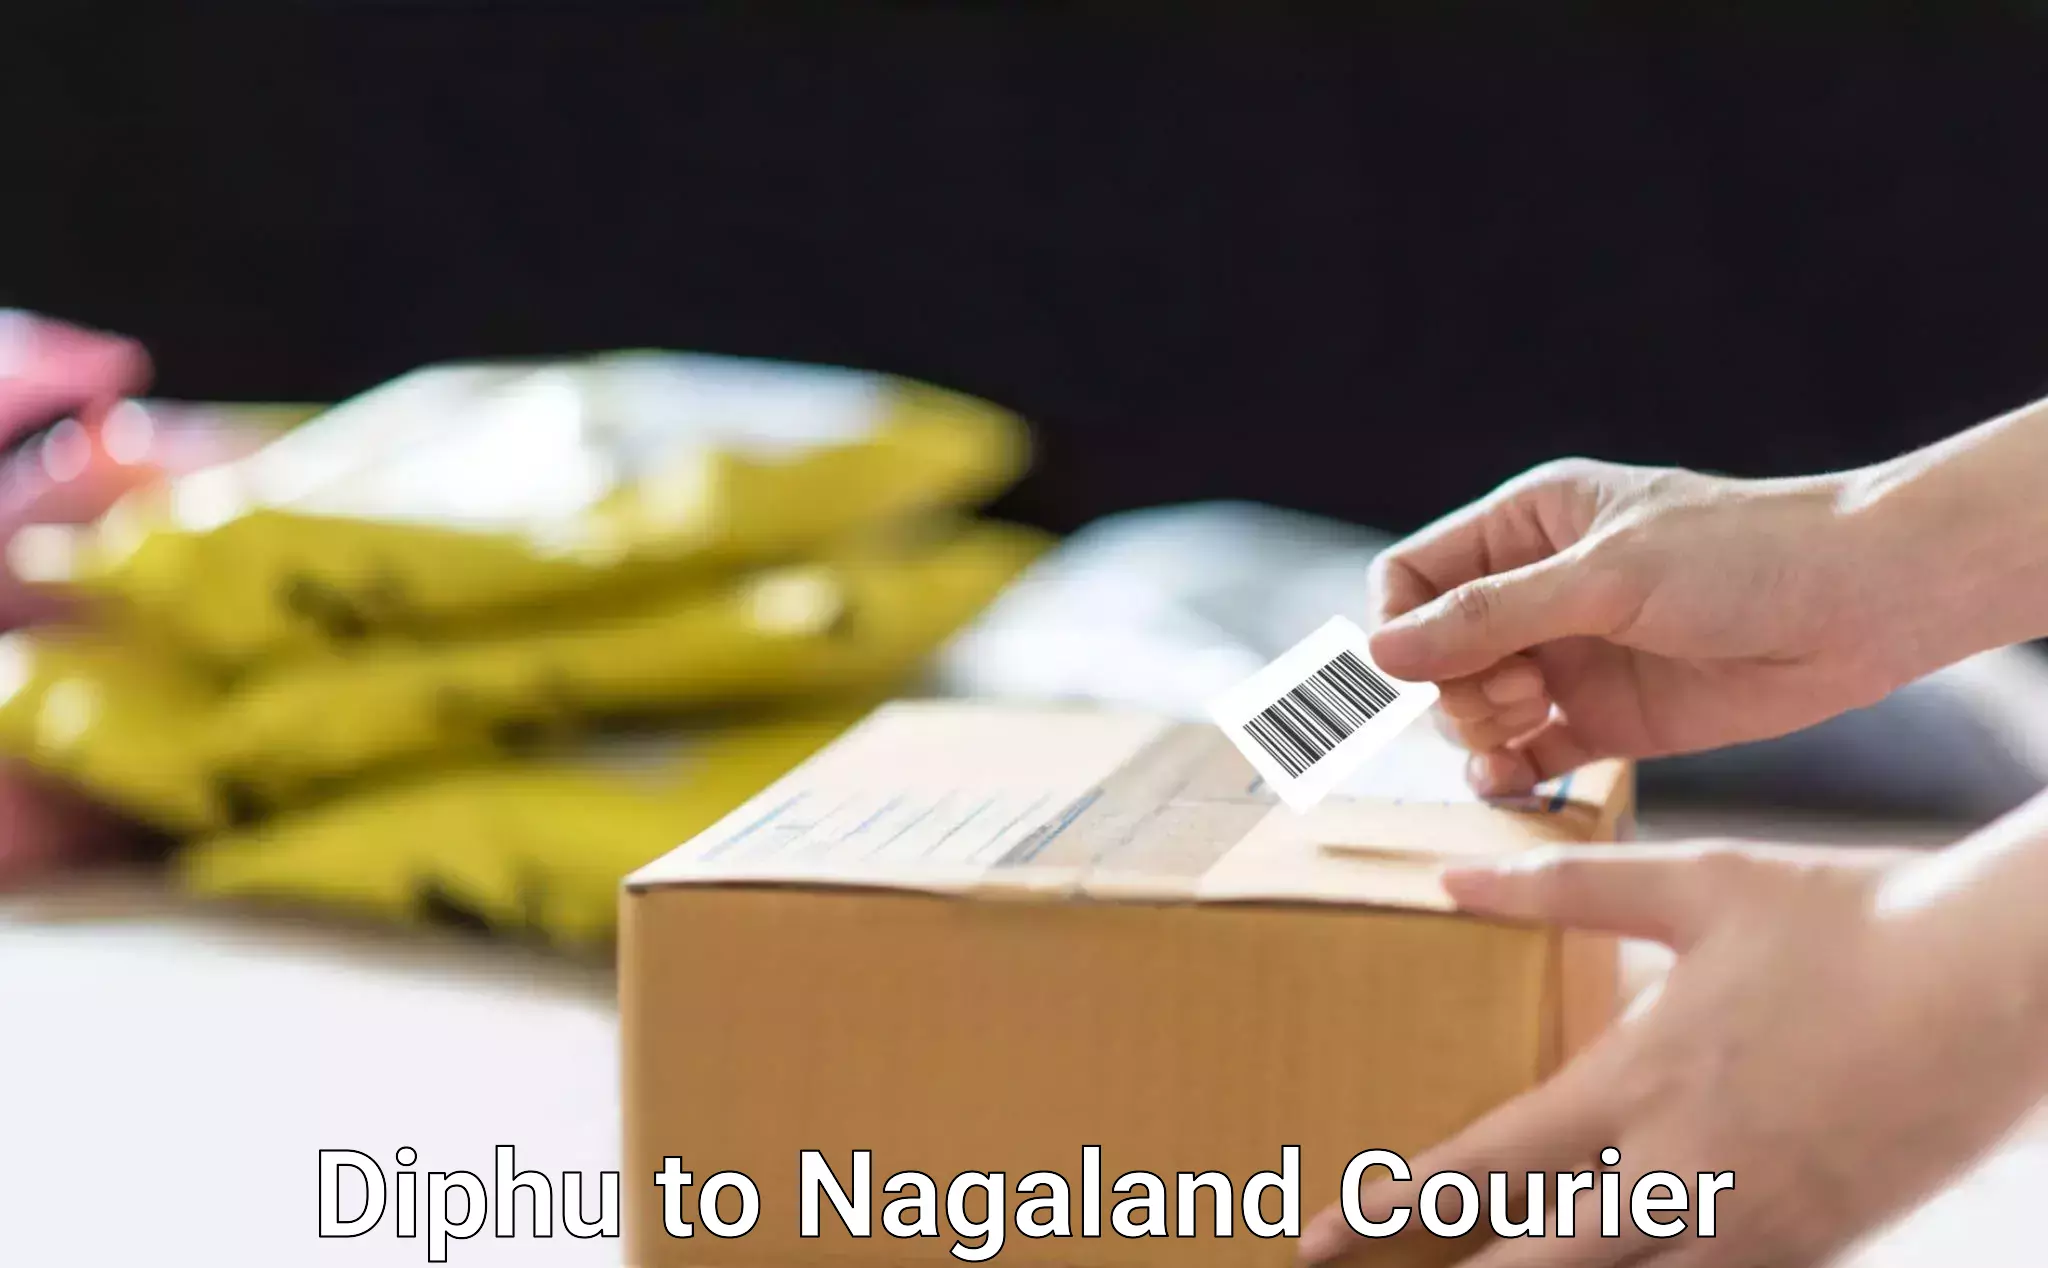 Nationwide courier service Diphu to Kiphire